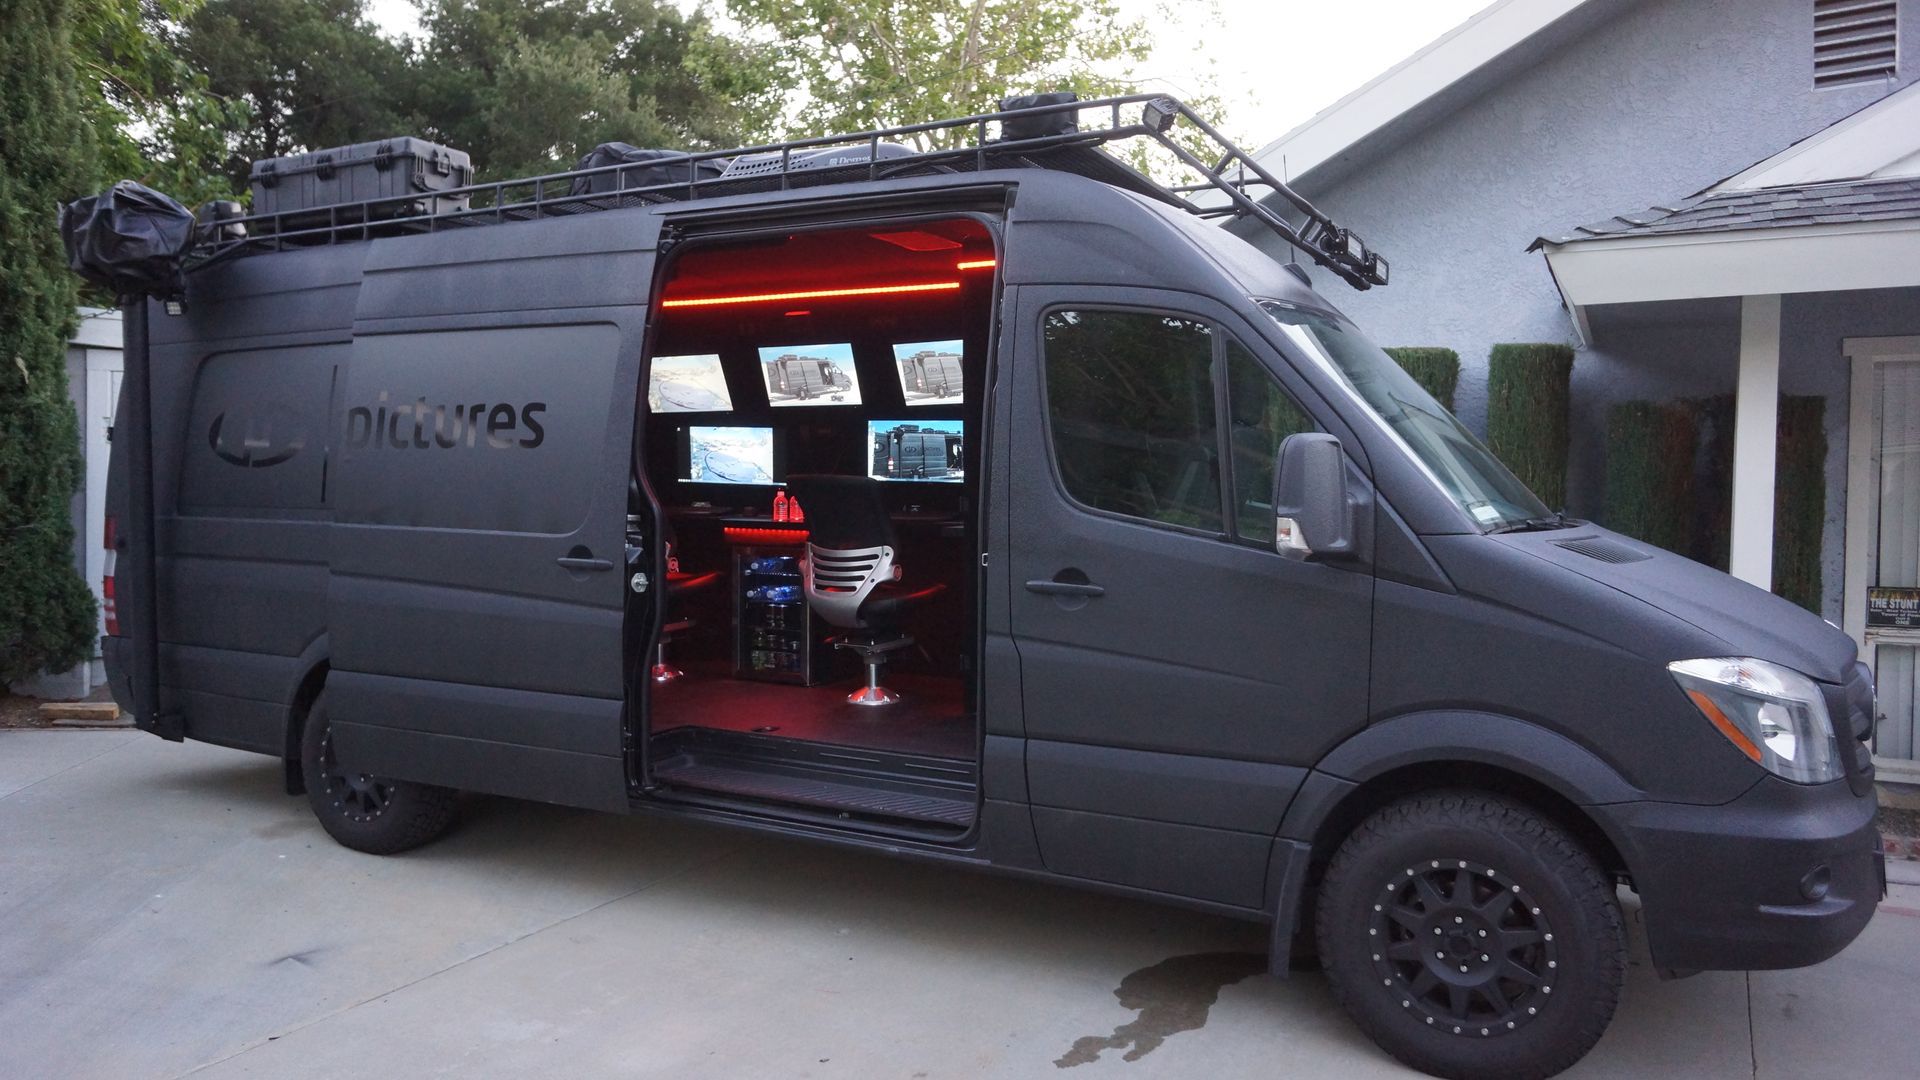 Full view of the Tactical Mobile Workspace, emphasizing its strategic mobility, with specialized work areas and multiple display monitors for real-time surveillance and operational efficiency.